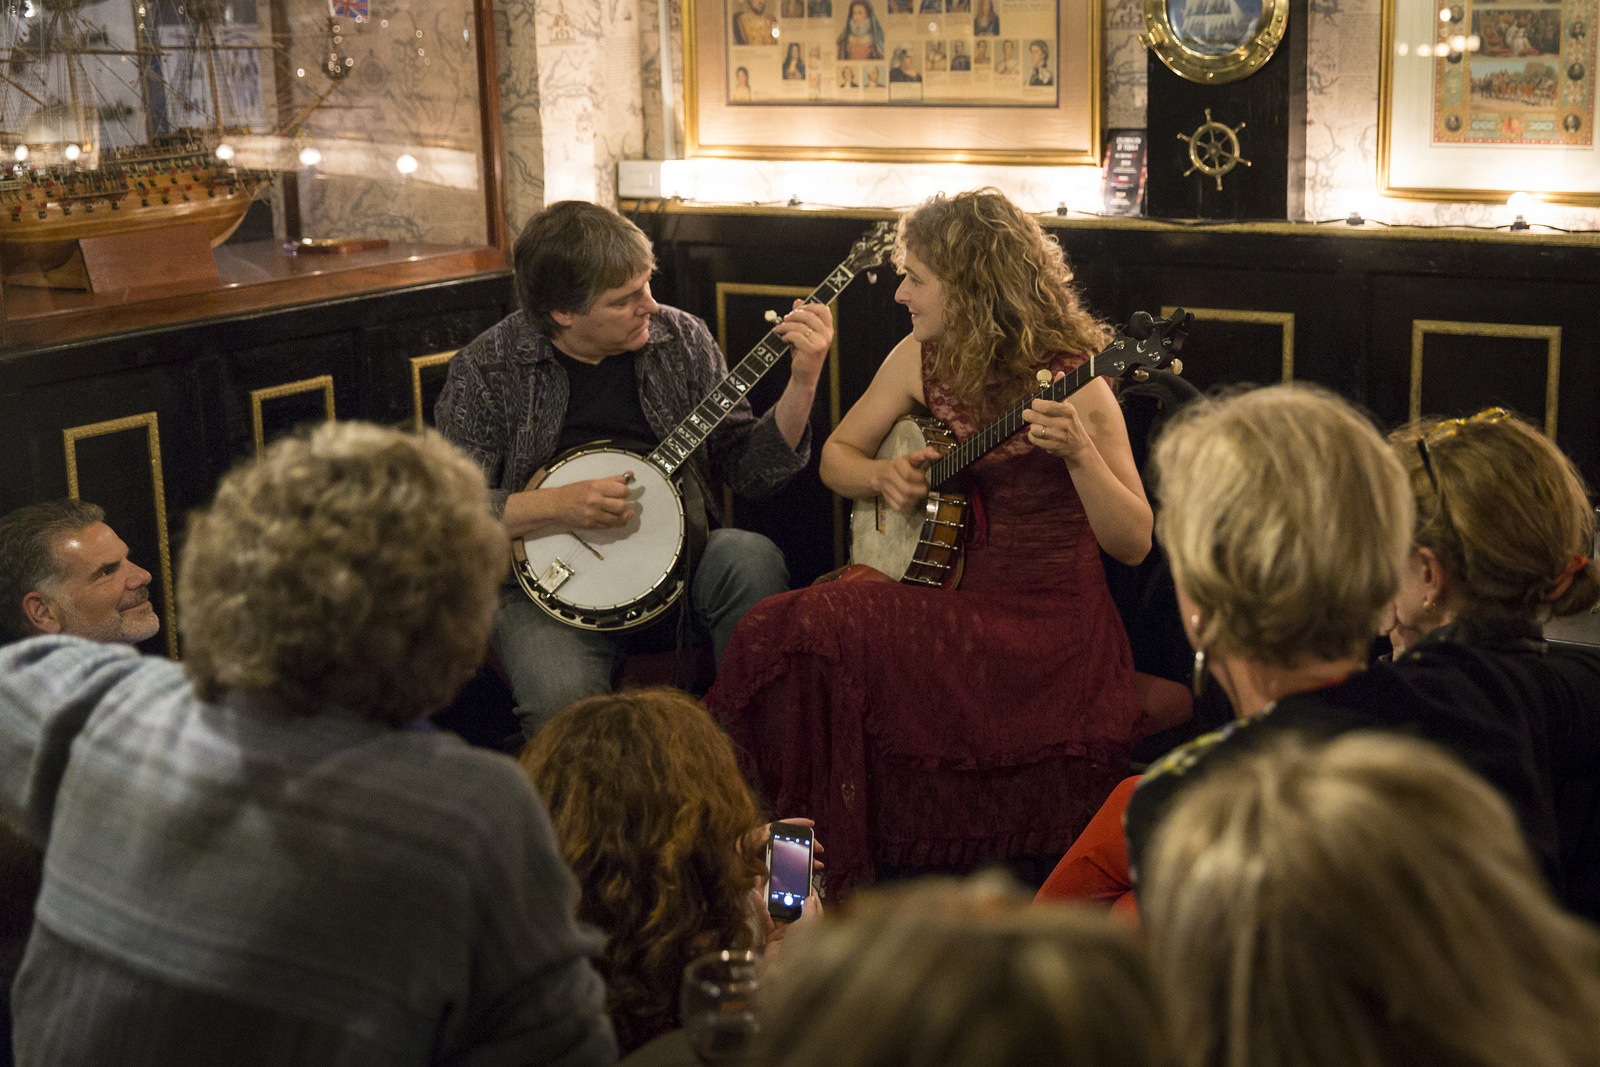 Married banjo masters  Béla Fleck and Abigail Washburn took us on a musical trip around the world during Session 3. Later that night, they played a special after-hours event. Photo: Marla Aufmuth/TED